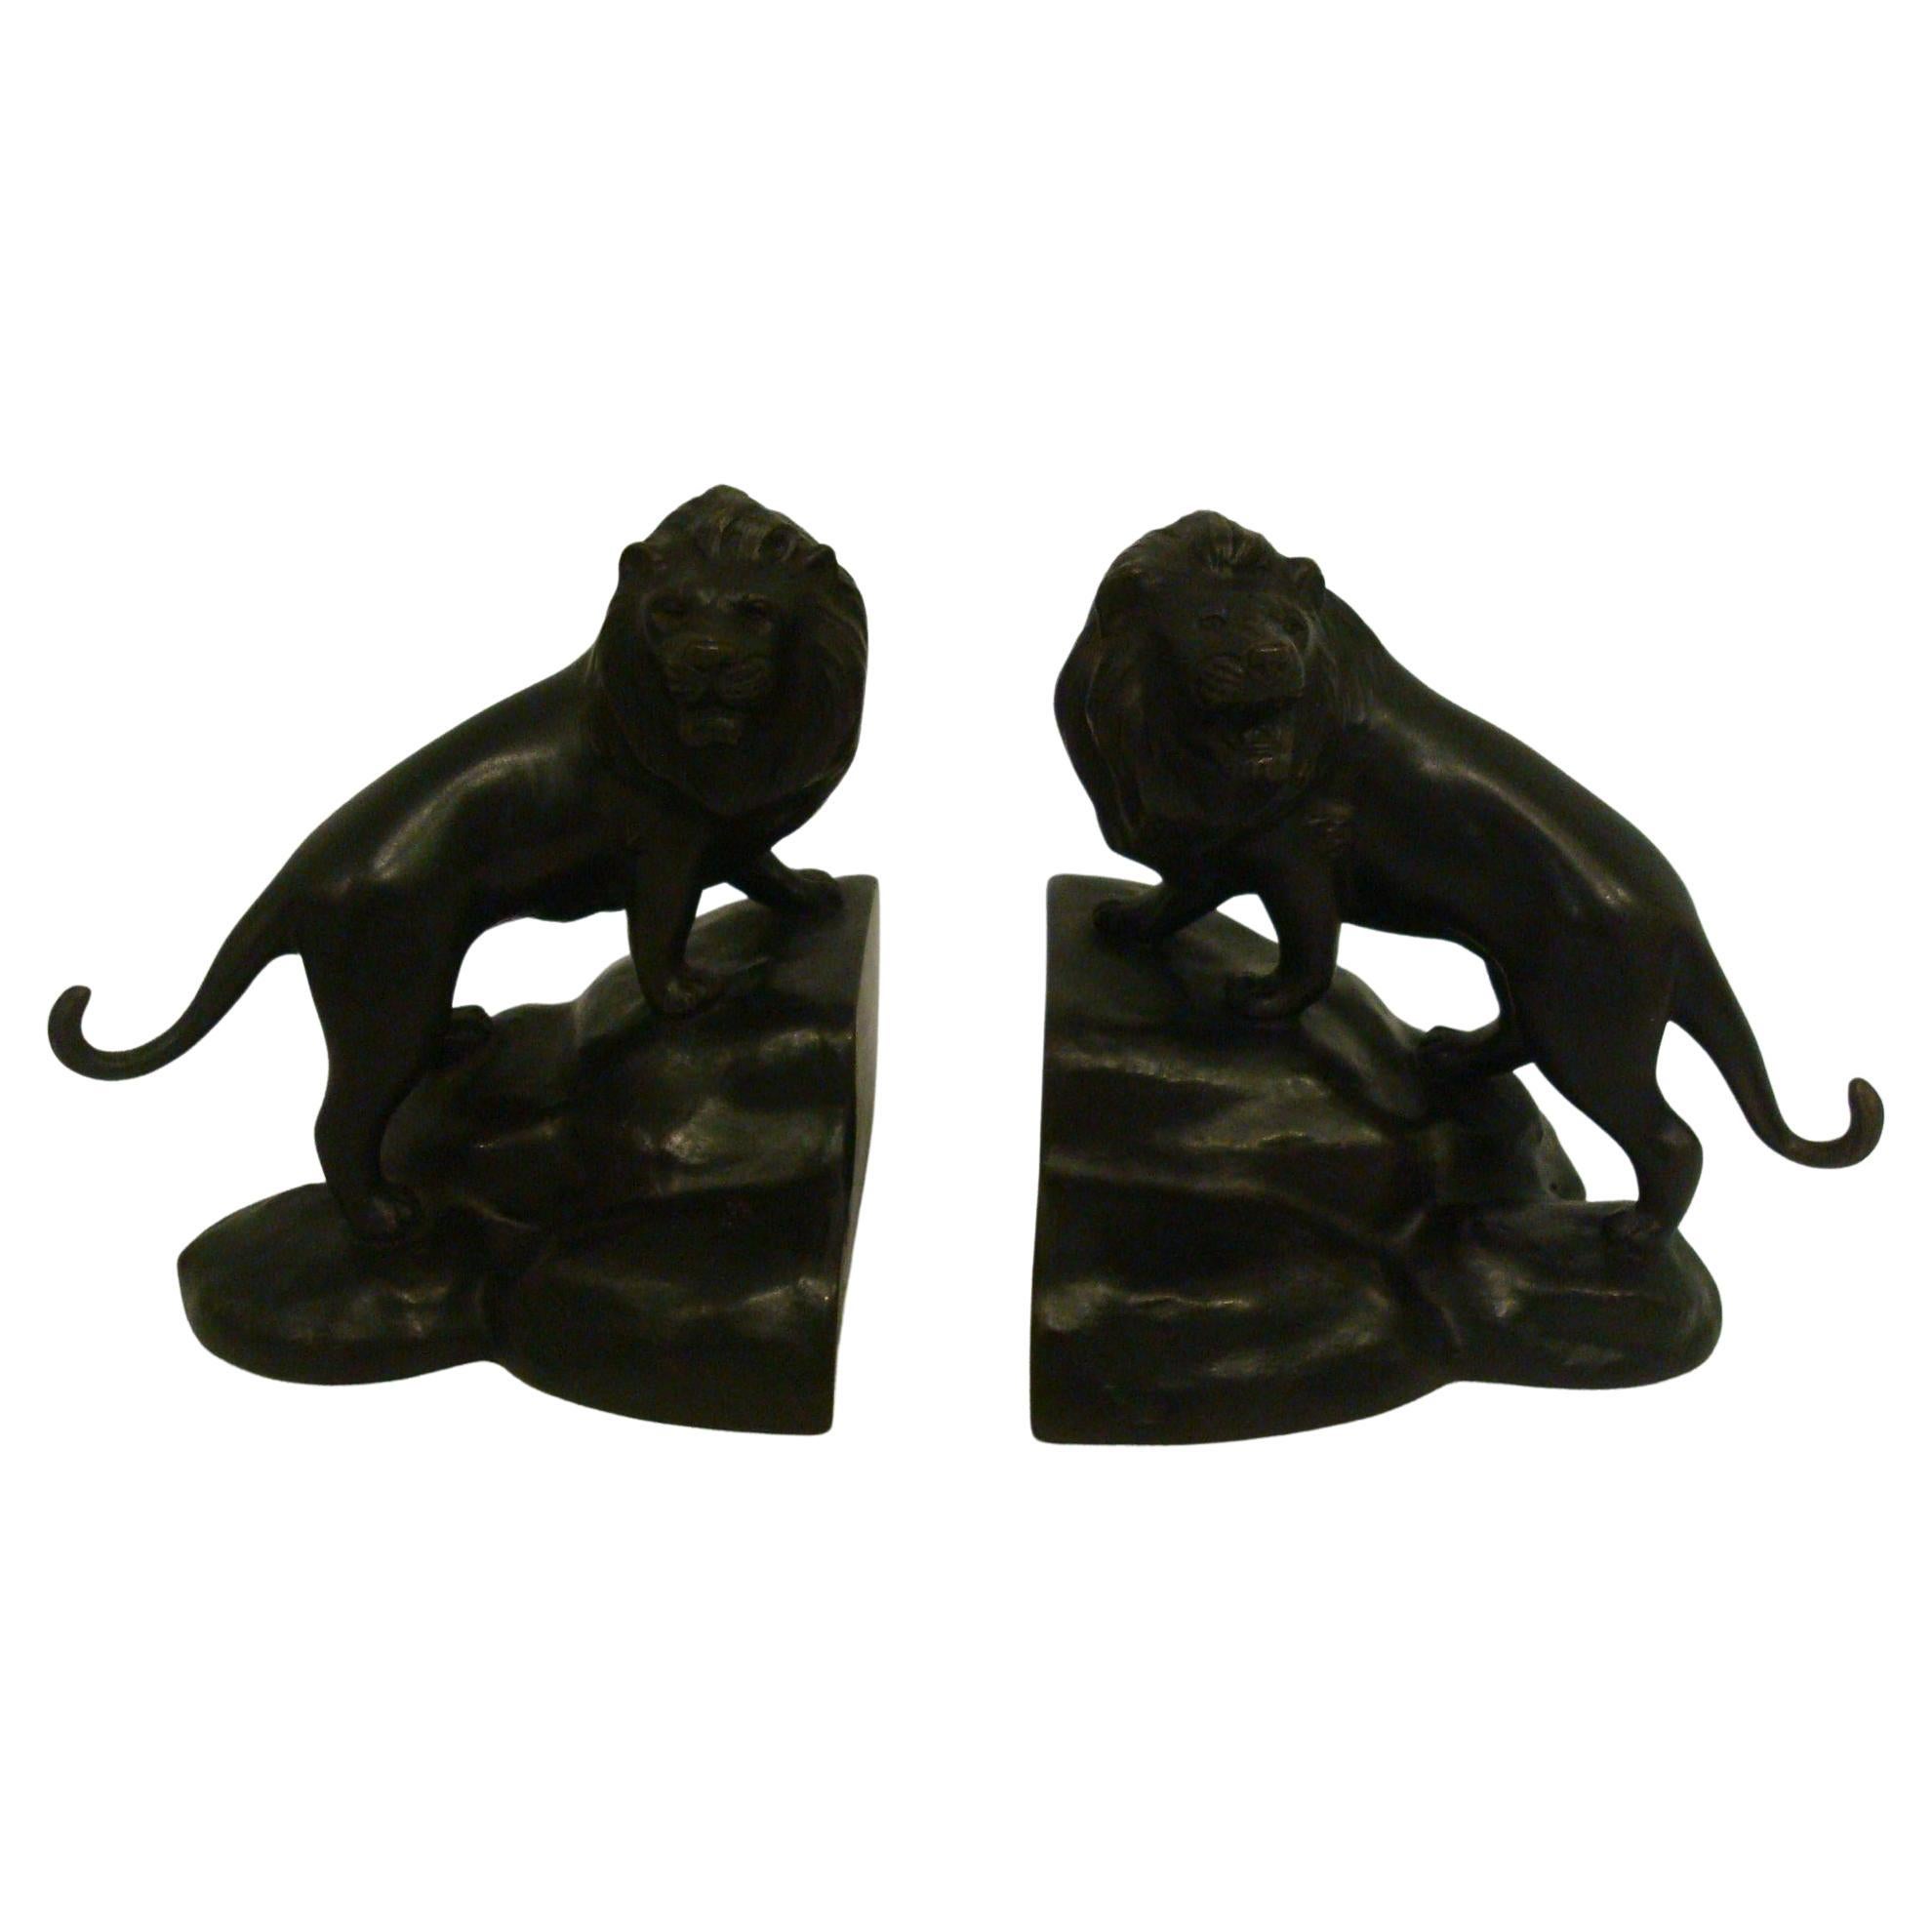 This superb and rare pair of Japanese Meiji period bronze bookends are cast in solid bronze and depict a pair of Lions, with their heads raised. These finely sculpted pieces are beautifully finished with great detail to the hair texture. When